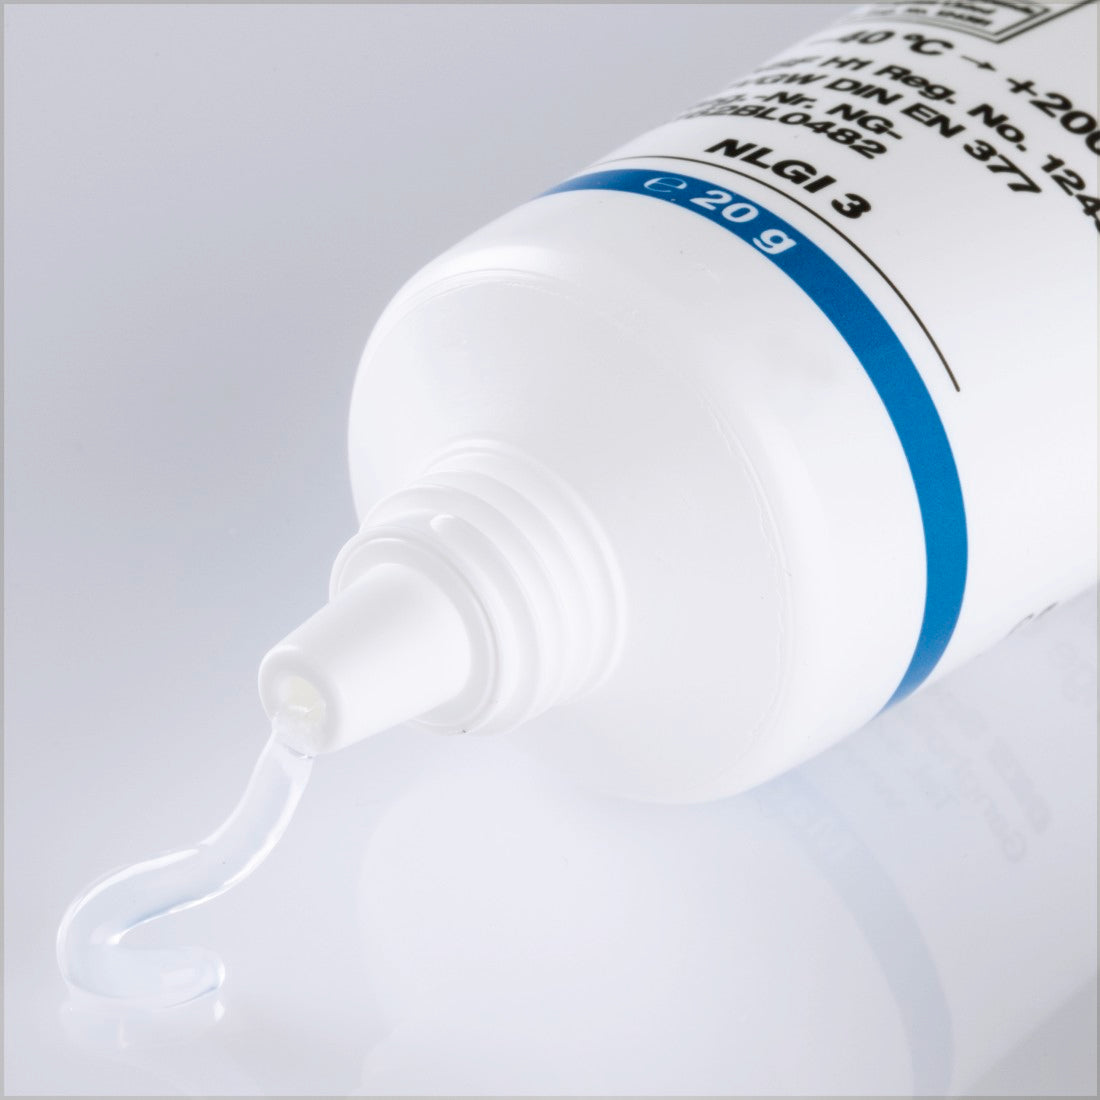 OKS OKS 1112 - silicone grease for vacuum valves, 500 g container